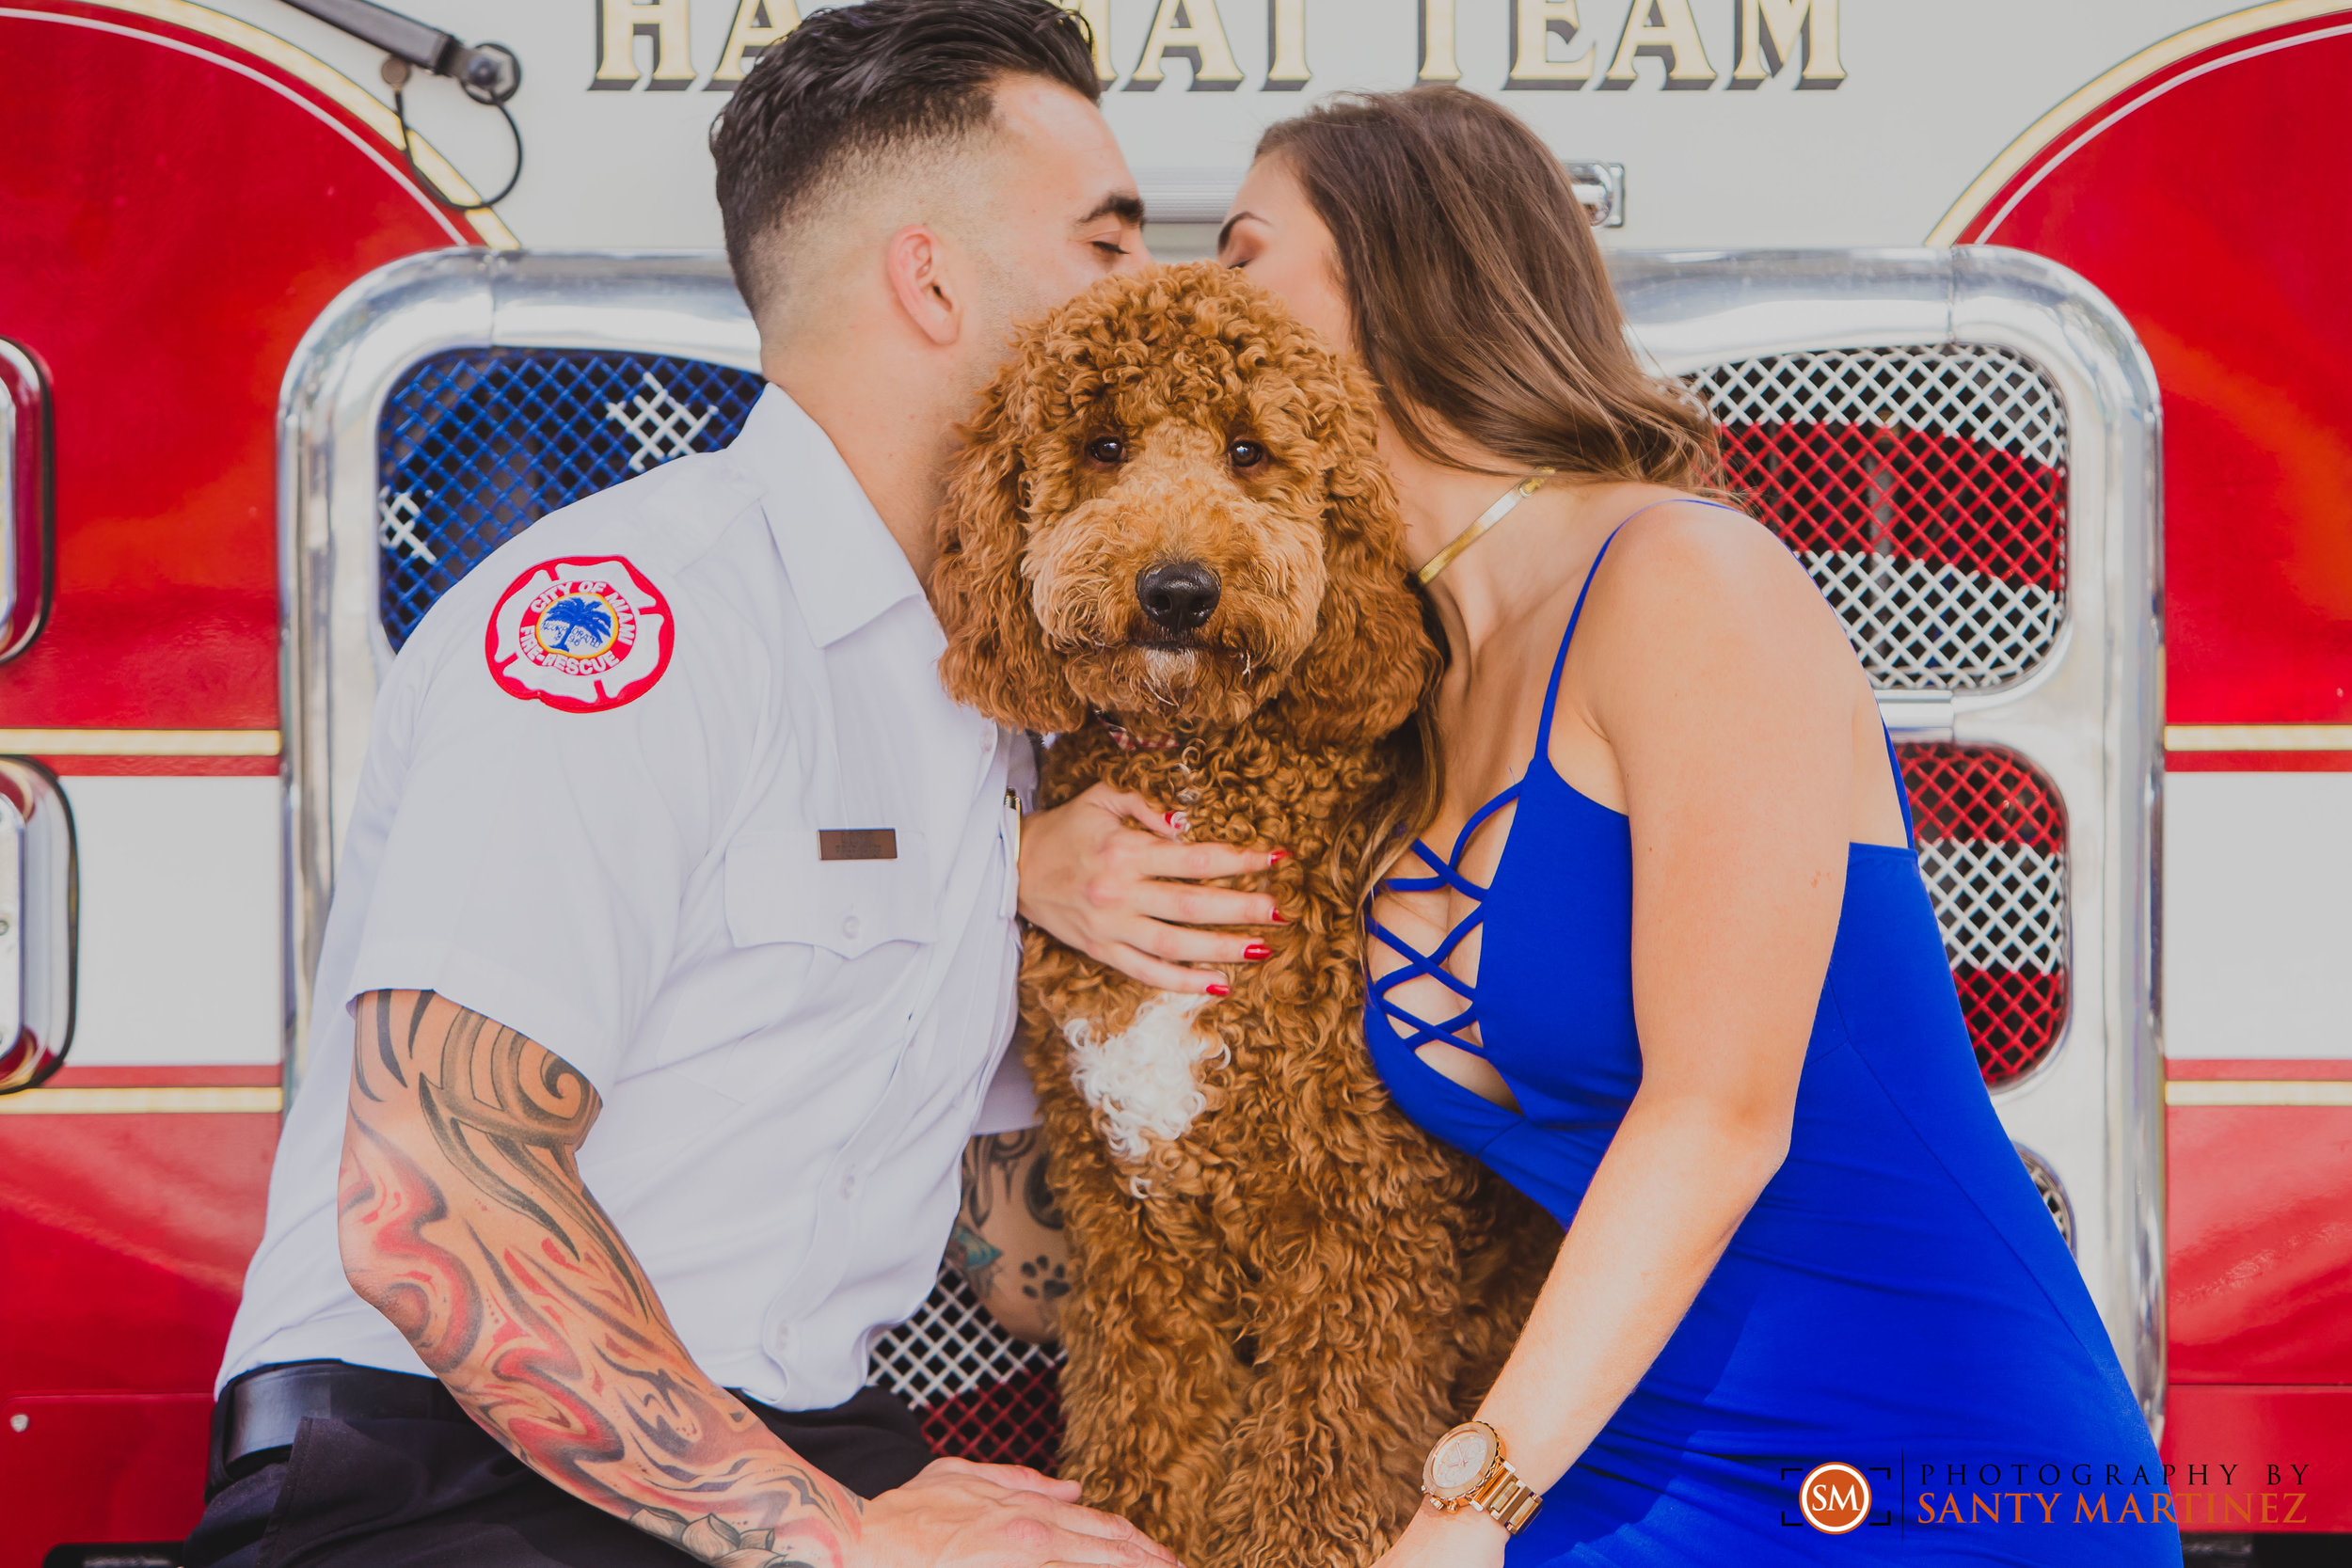 Miami Firefighter Engagement Session - Photography by Santy Martinez-5.jpg